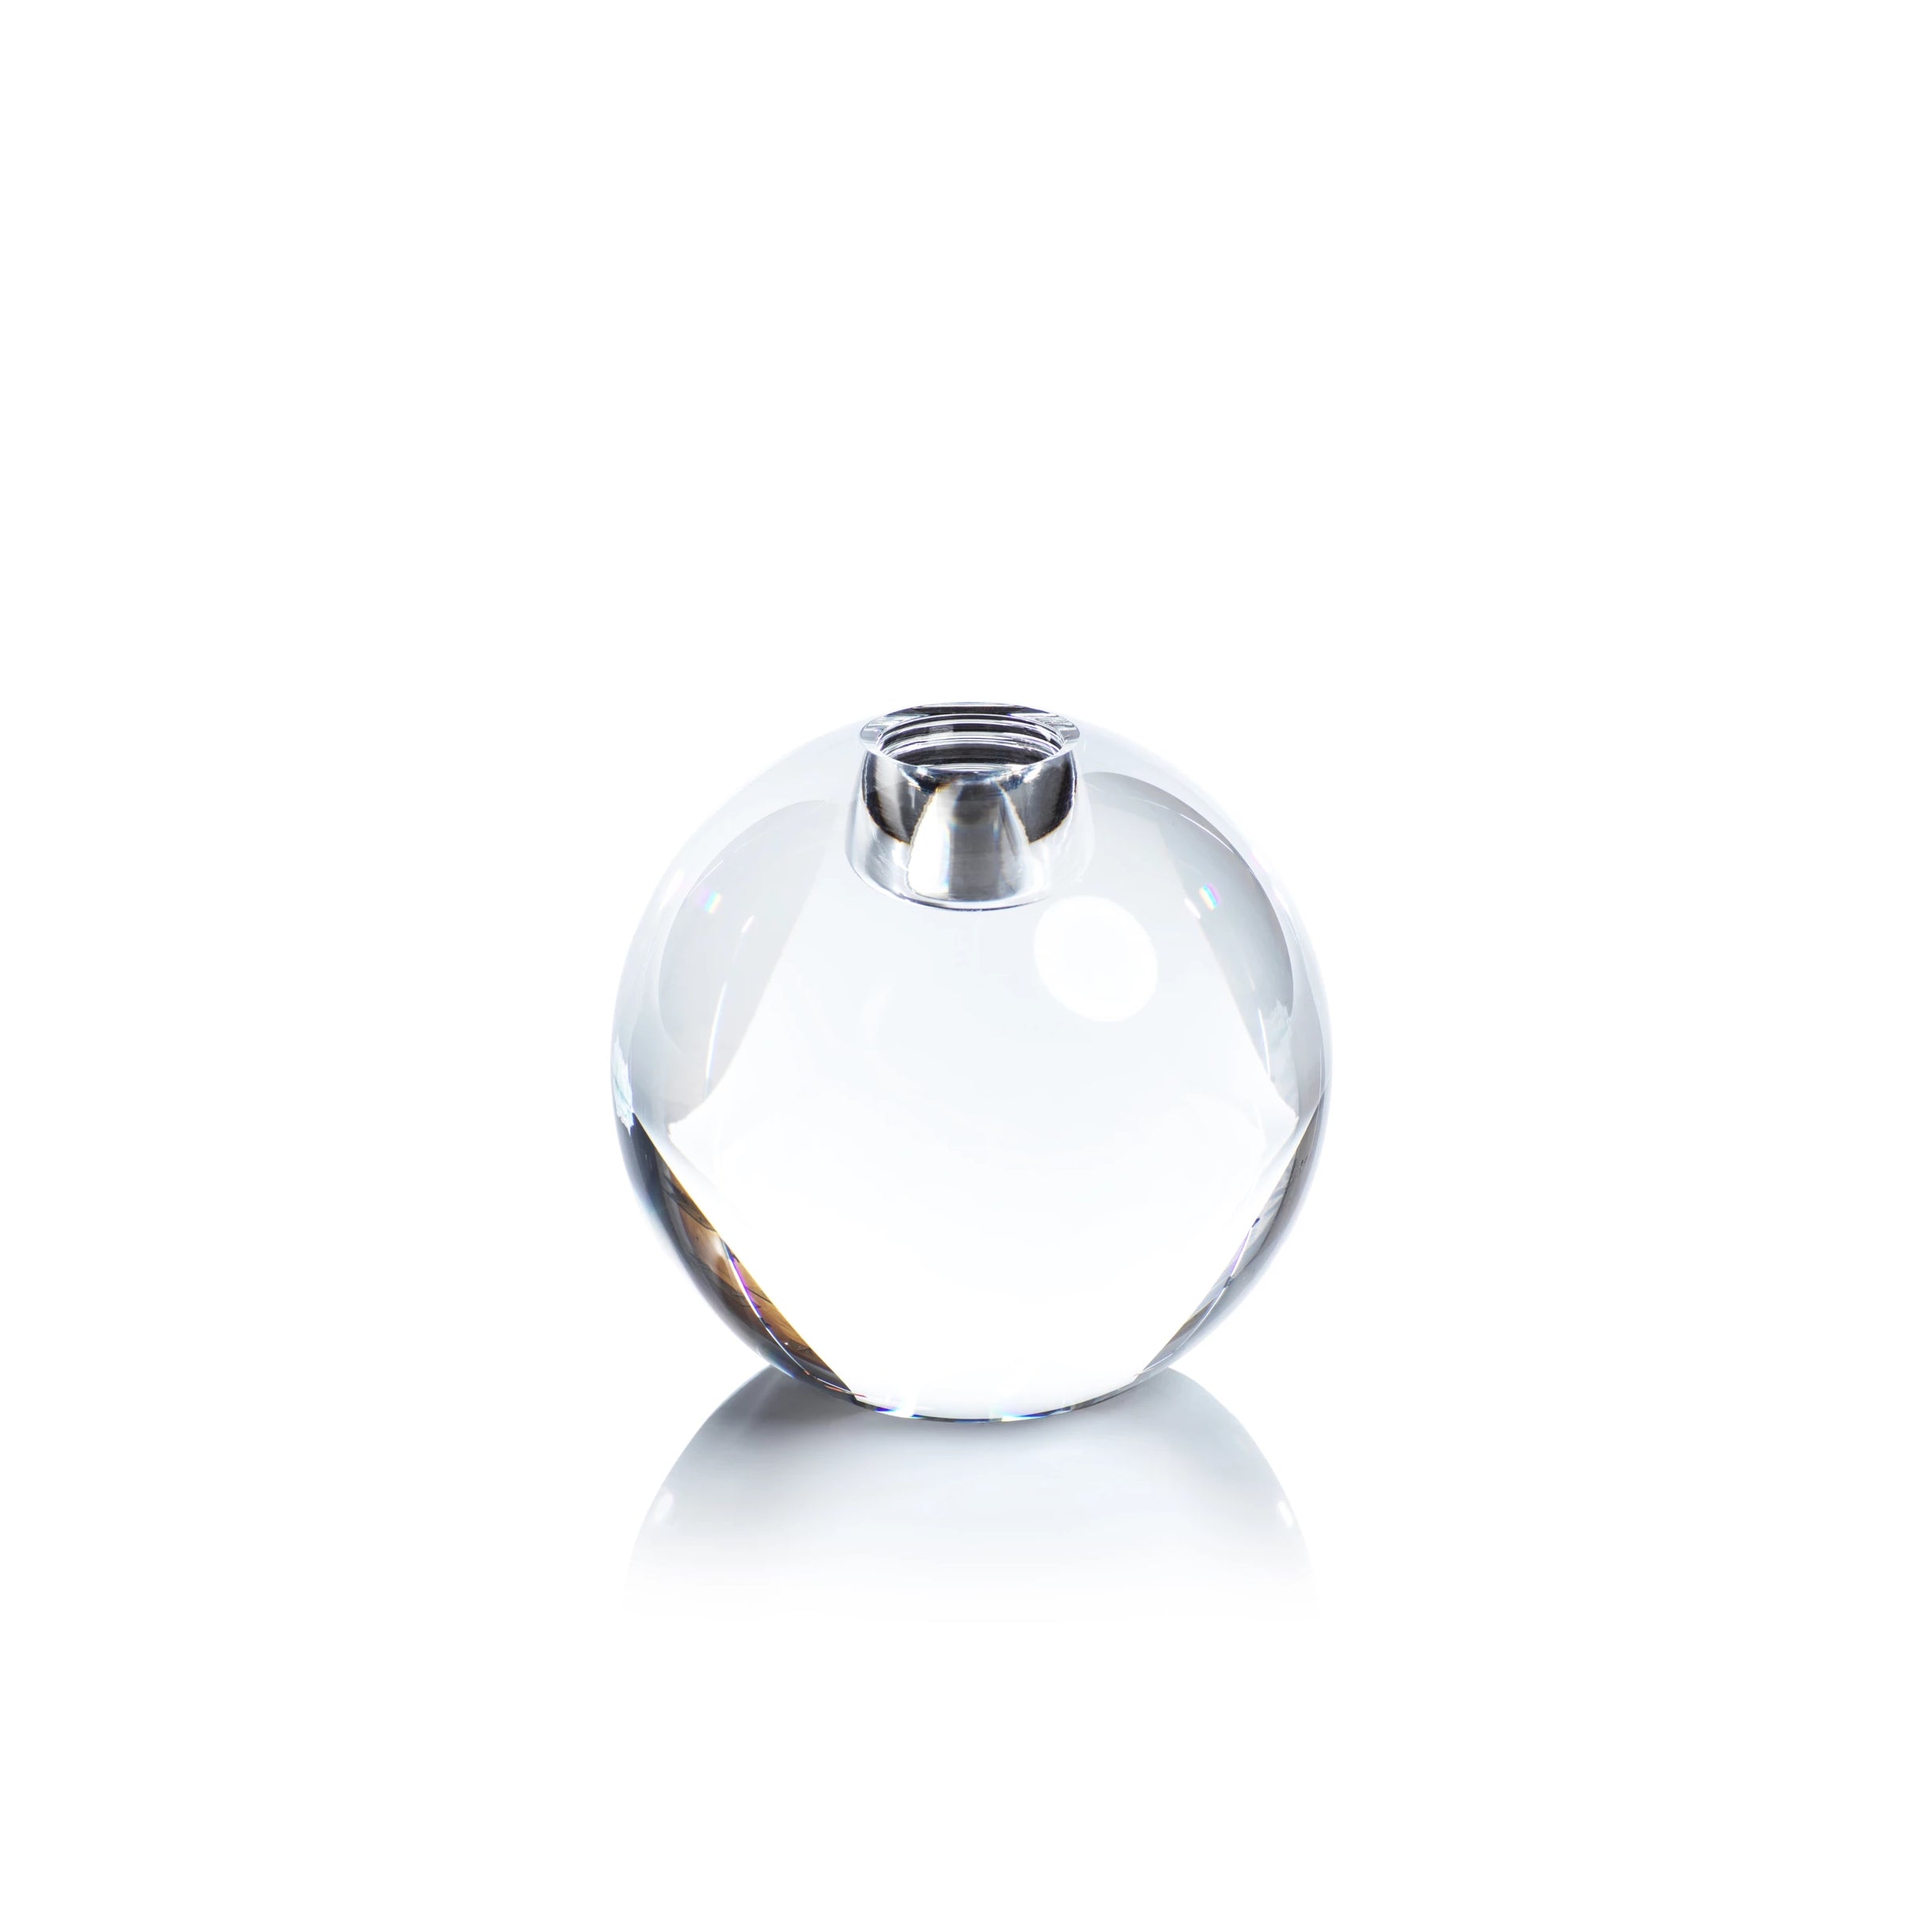 Round Crystal Glass Taper Holder - CARLYLE AVENUE